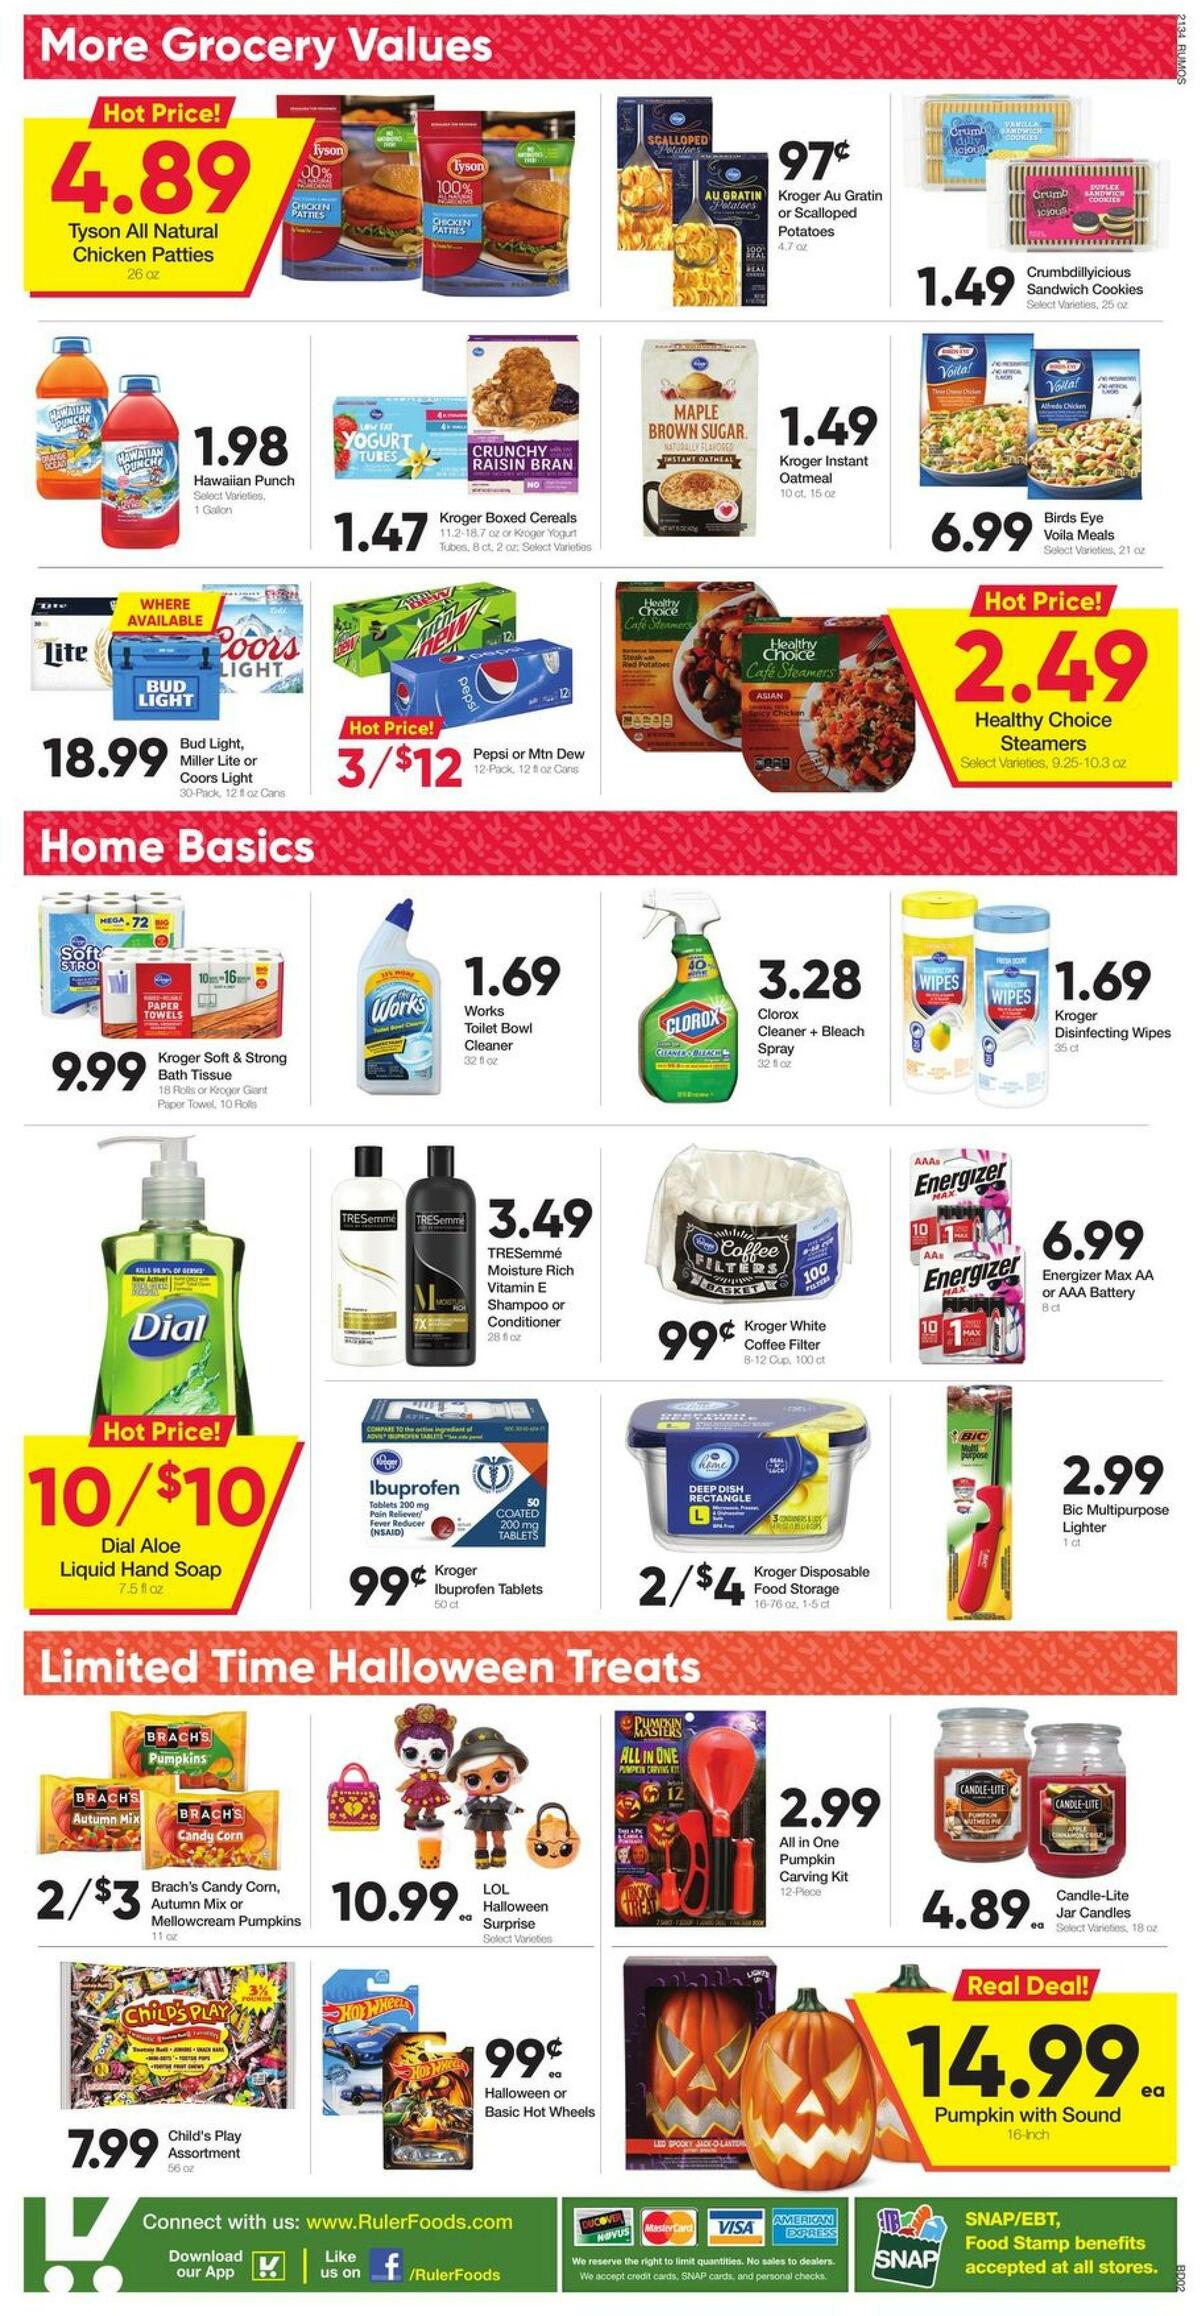 Ruler Foods Weekly Ad from September 22